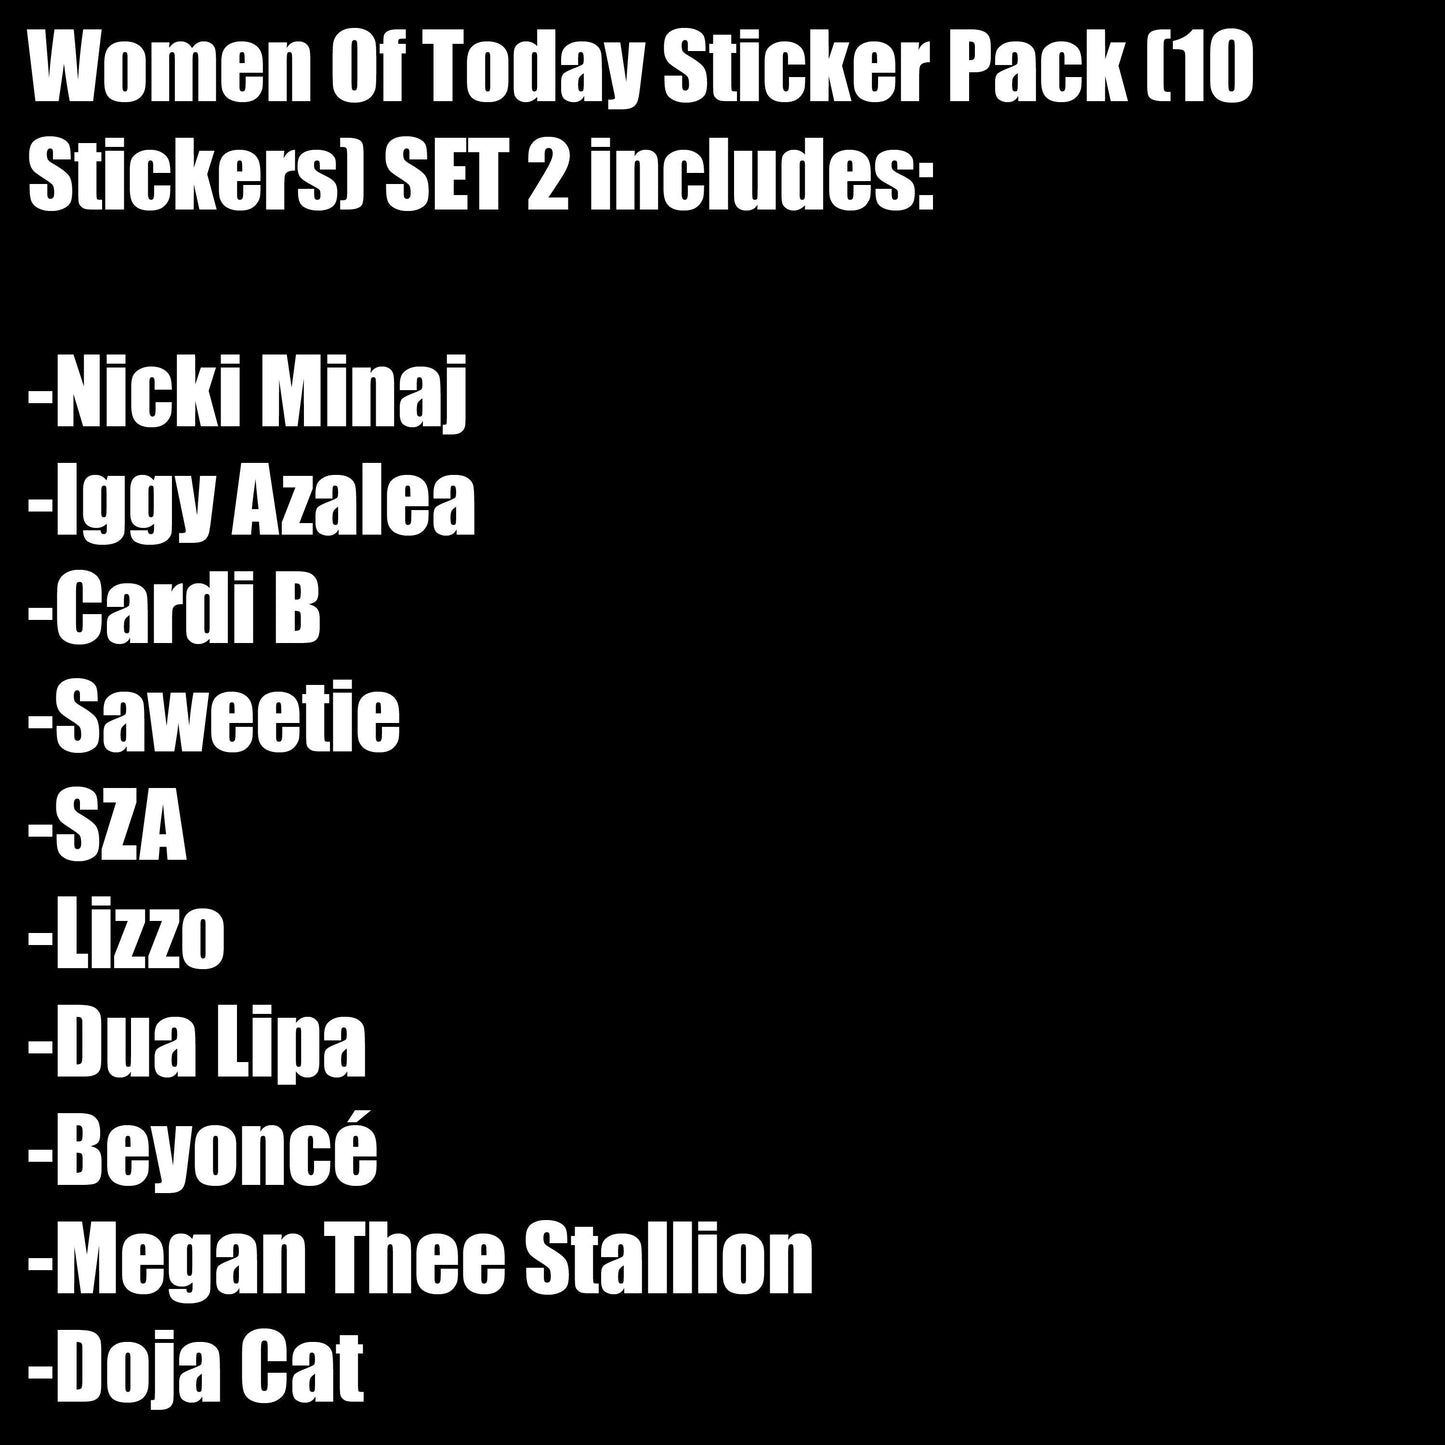 Women Of Today Sticker Pack (10 Stickers) SET 2